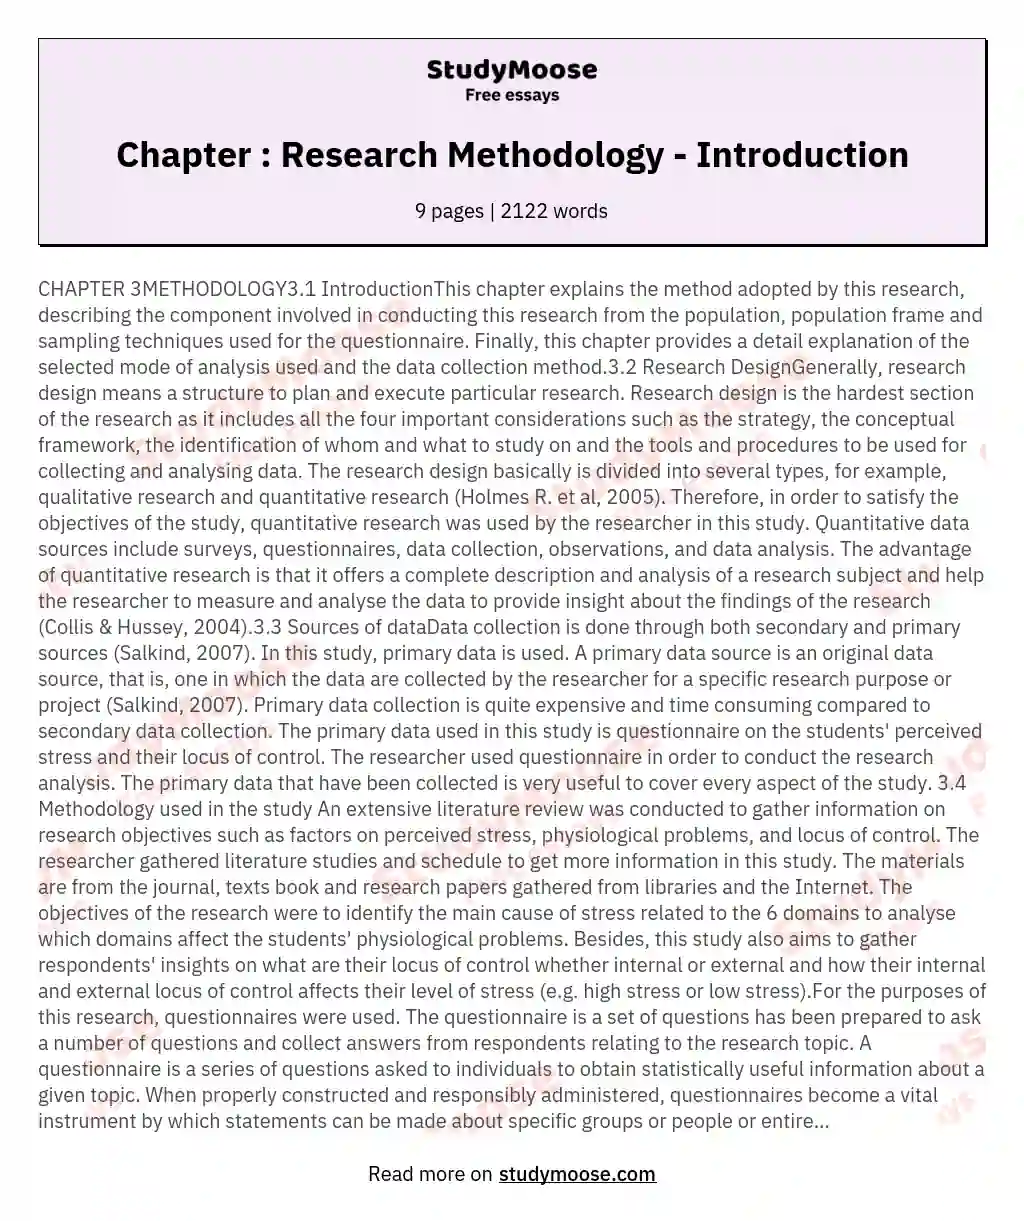 Chapter : Research Methodology - Introduction